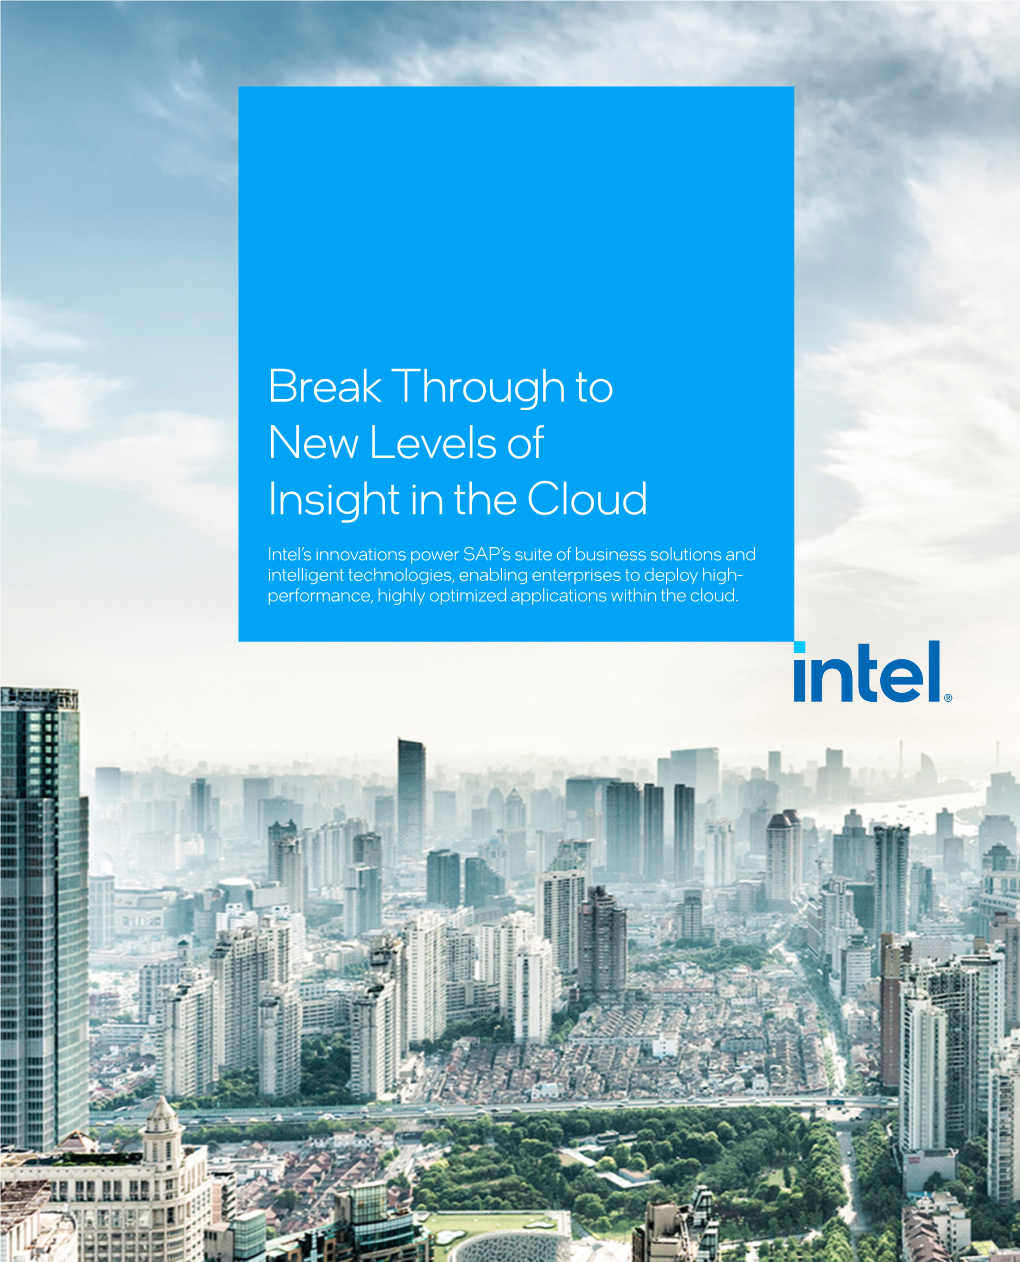 Break Through to New Levels of Insight in the Cloud